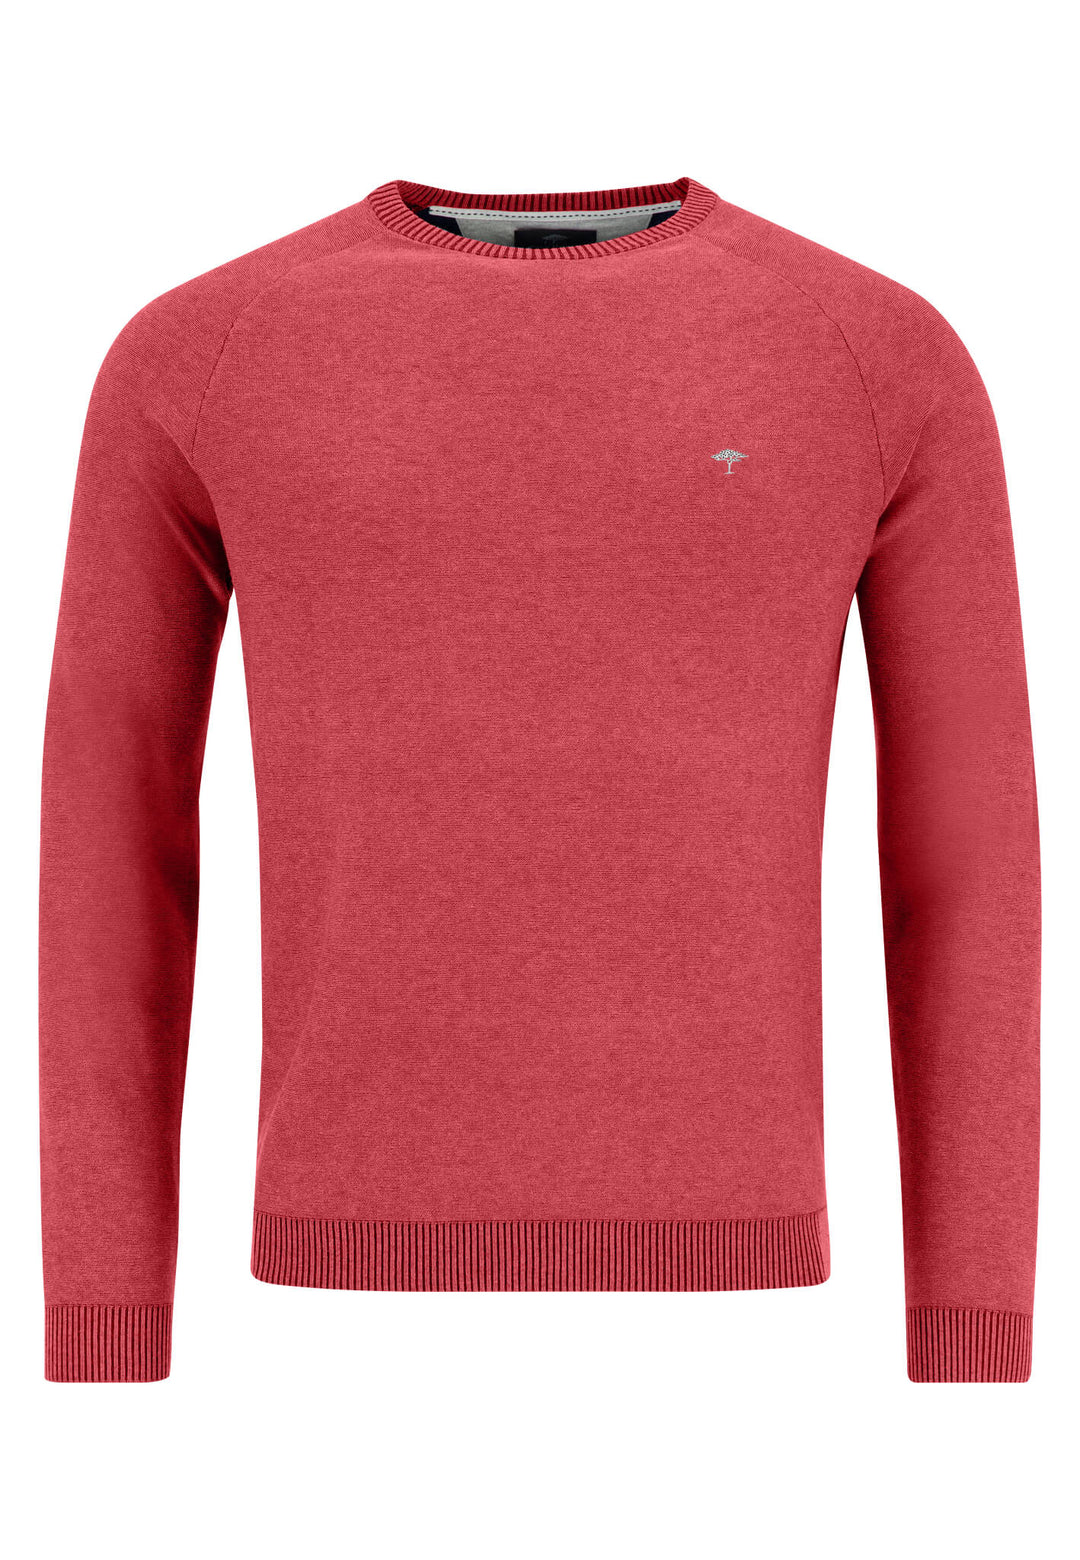 fine of – FYNCH-HATTON cotton sweater Outlet FYNCH-HATTON made |